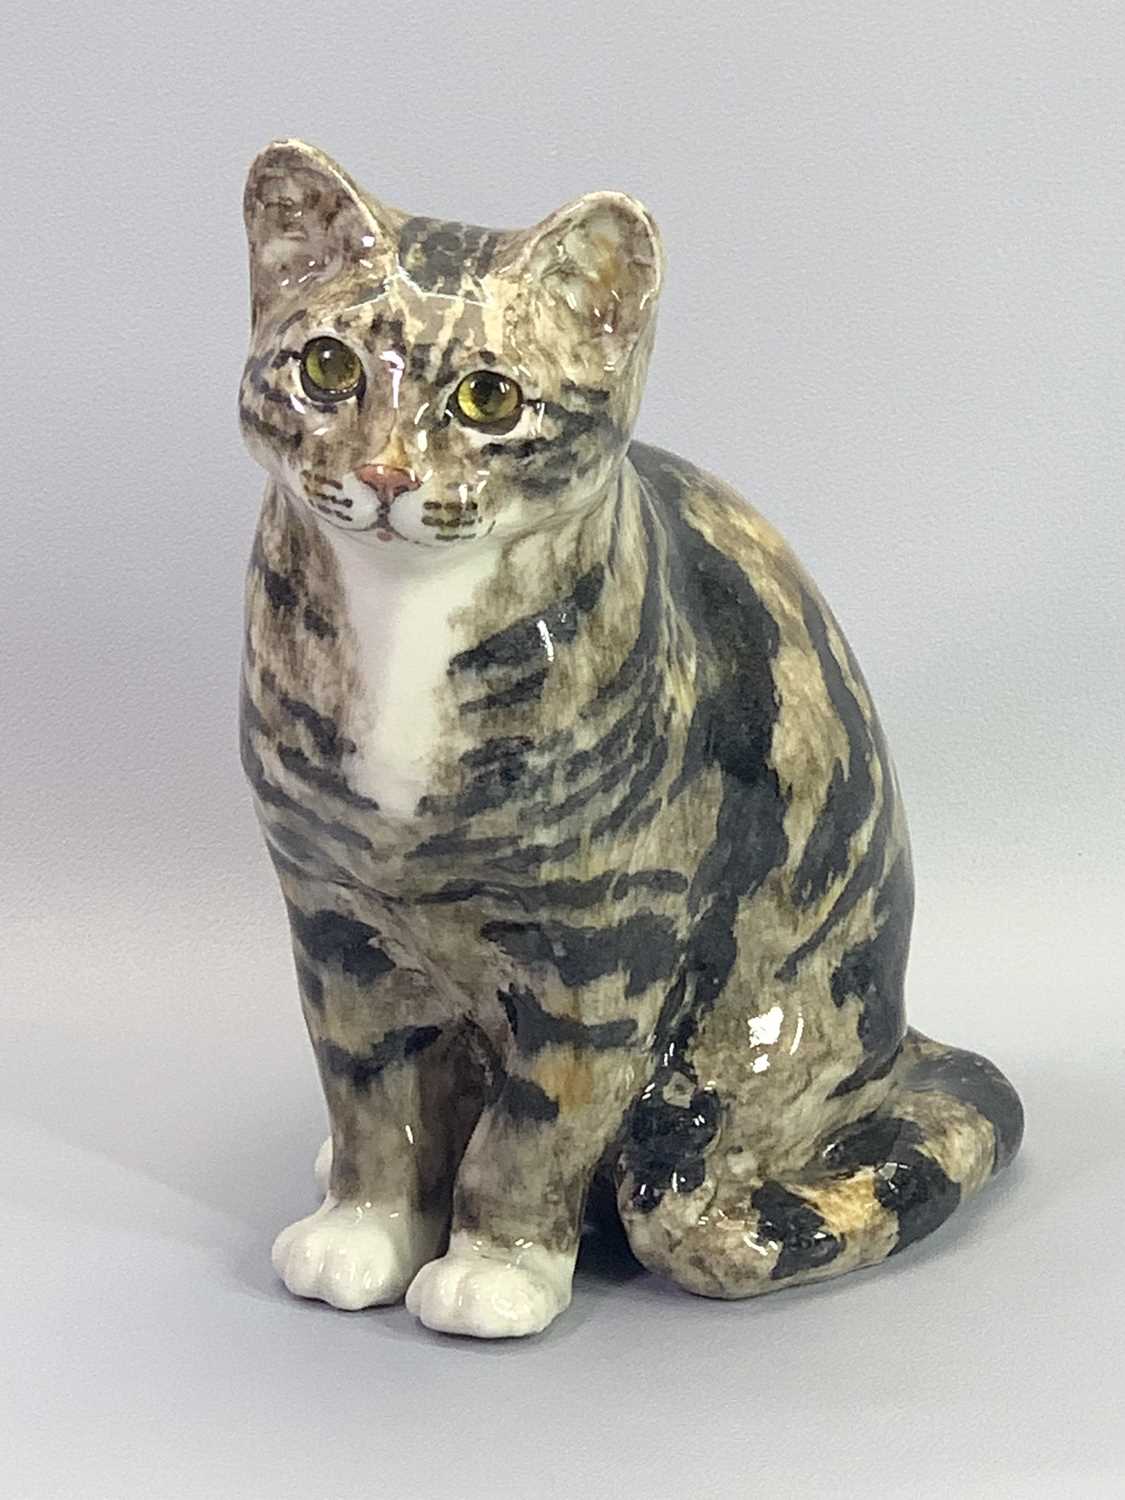 SEATED WINSTANLEY POTTERY TABBY CAT WITH GLASS EYES - 29.5cms H